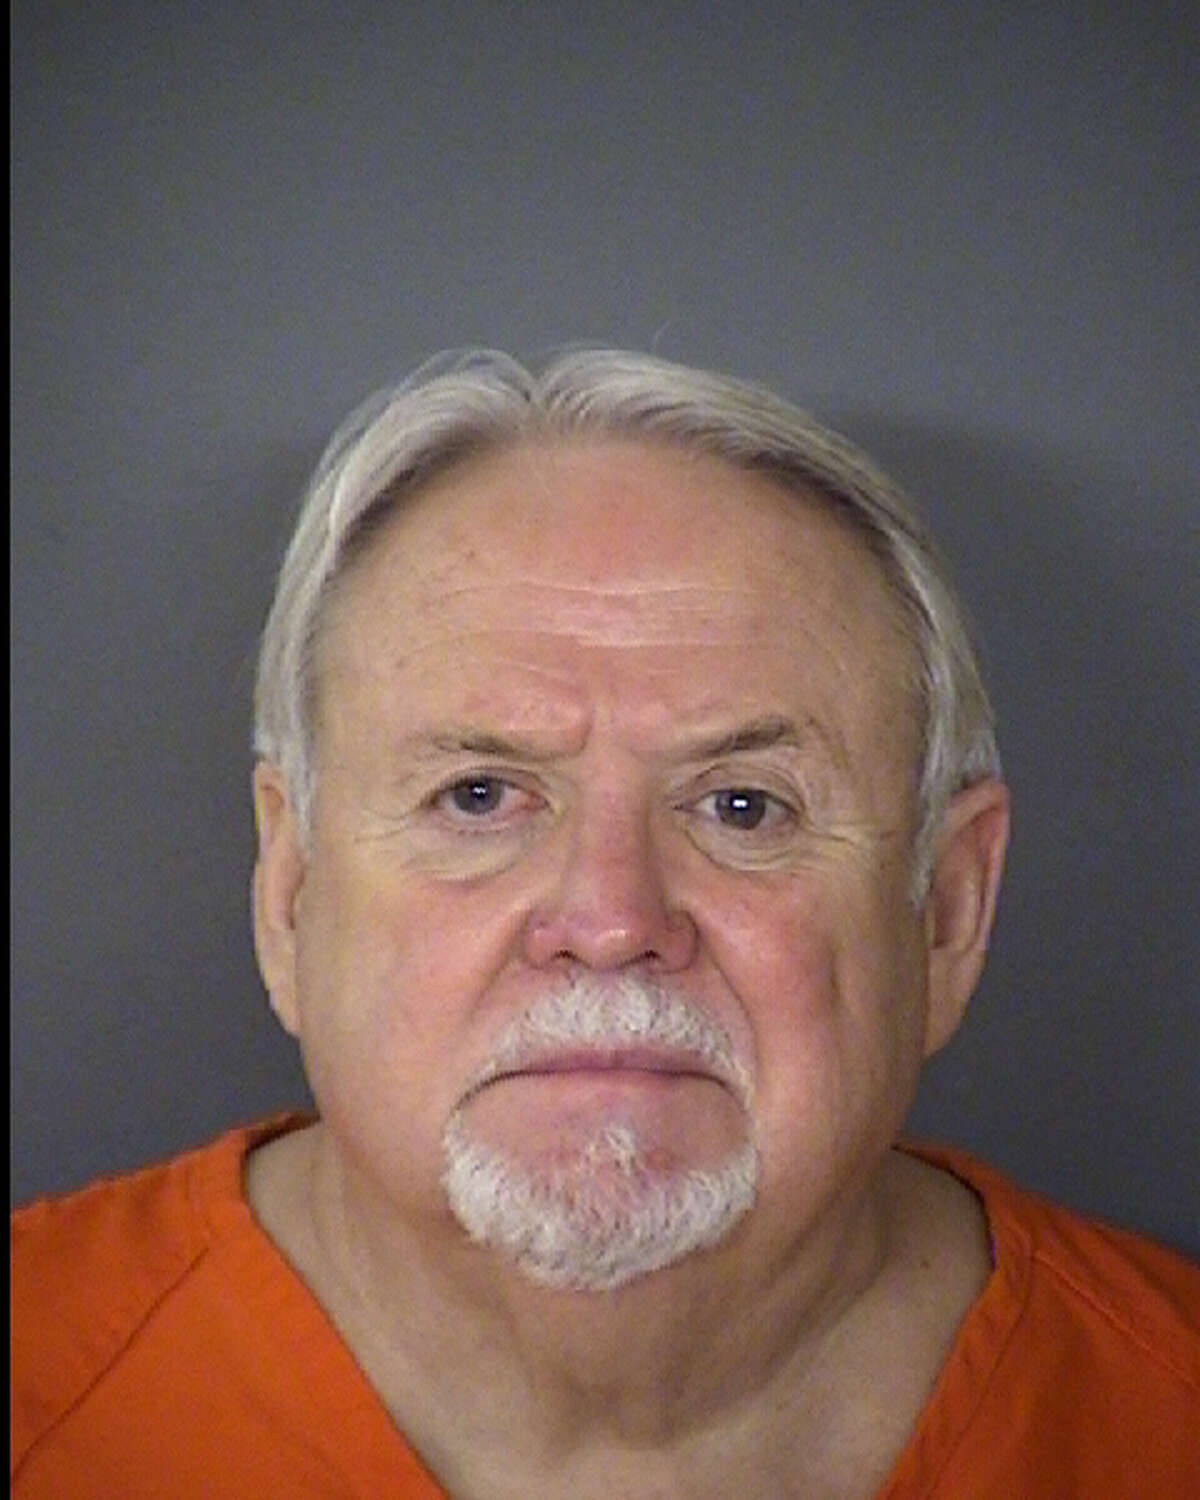 John Steven Braden, 66, is accused of stealing from an elderly woman for whom he was a caregiver and legal guardian.